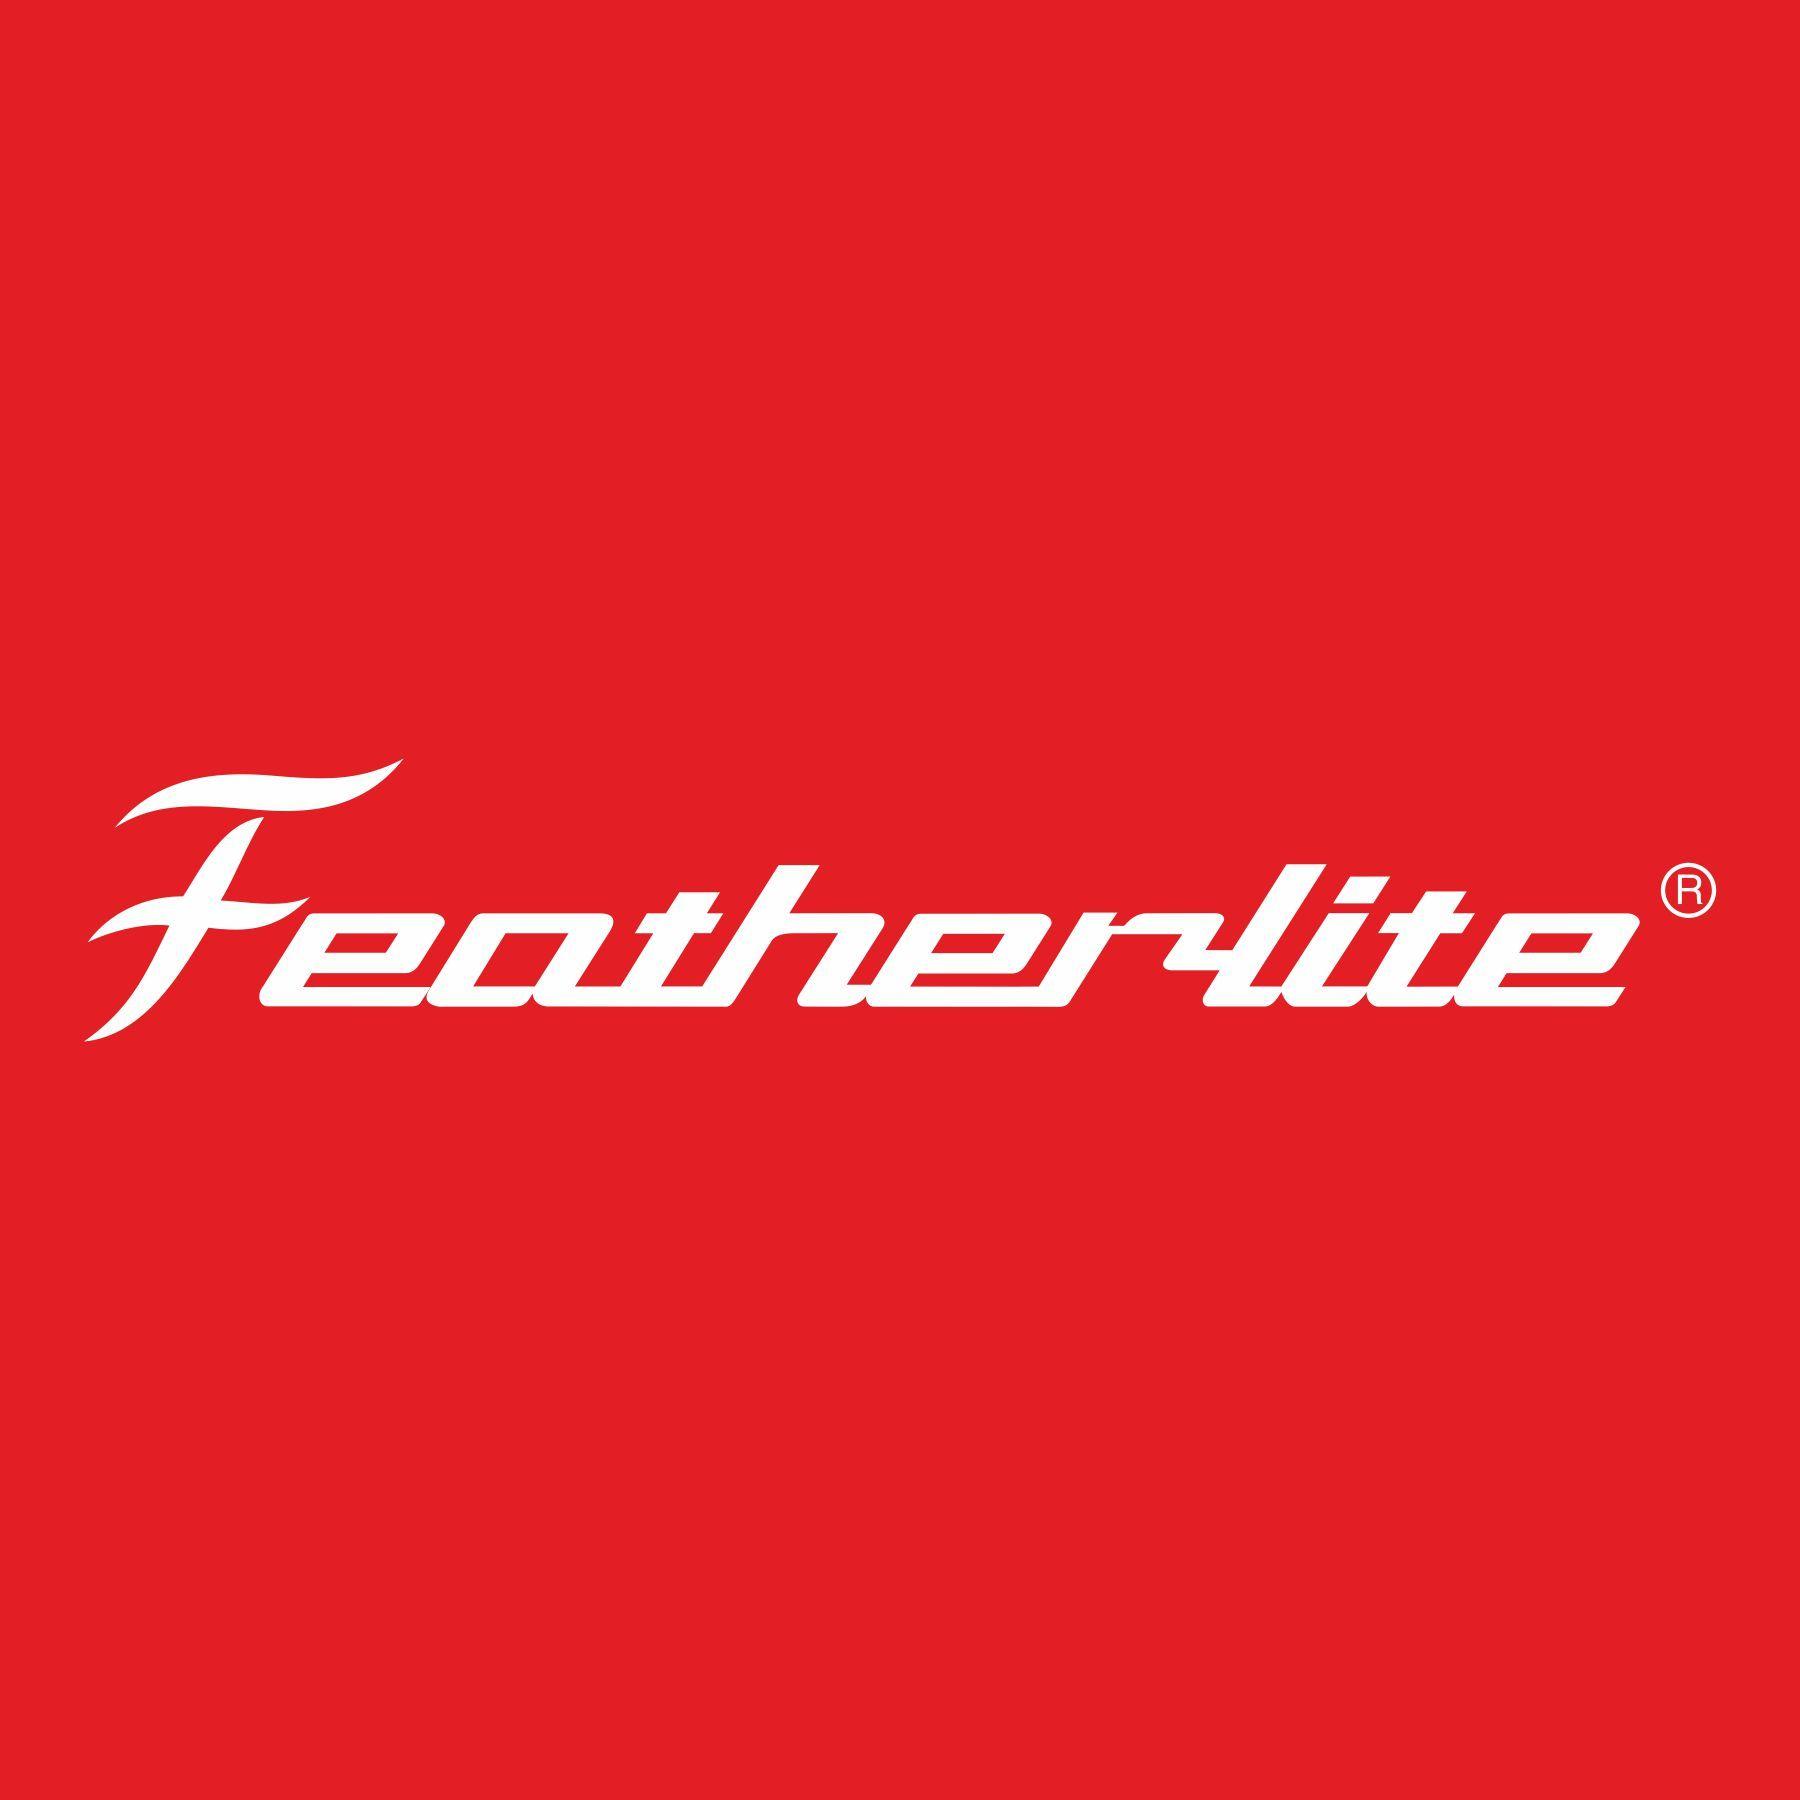 Featherlite Logo - A' Design Award and Competition - Guide Library System, Book Rack ...